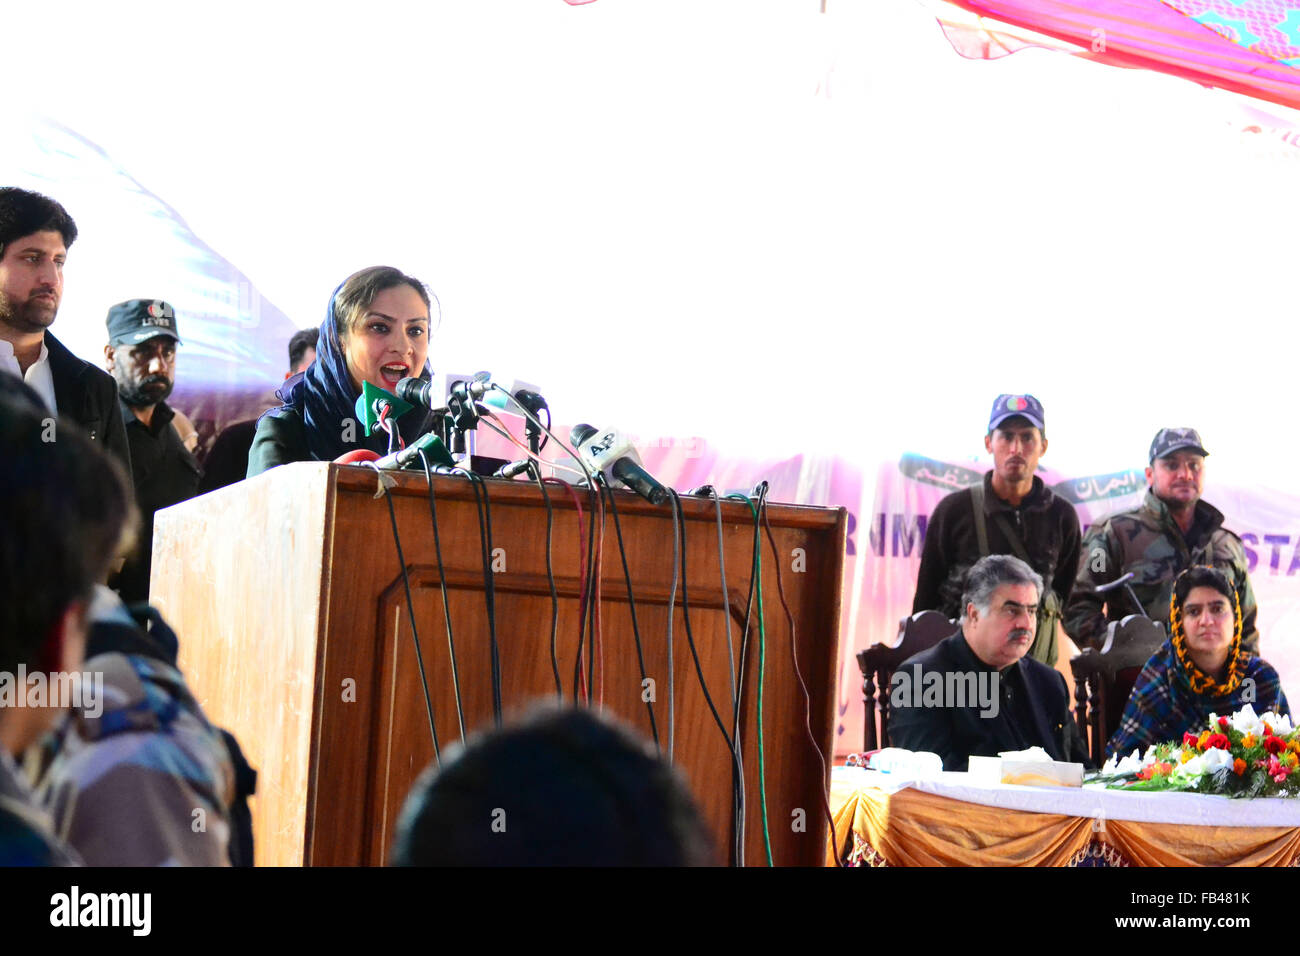 Quetta, Pakistan. 9th January, 2016. State Minister for BISP addressing to the launch ceremony of Benazir income support program 'BISP' beneficiaries outreach and Community strategy in Quetta Pakistan Credit:  Din Muhammad Watanpaal/Alamy Live News Stock Photo